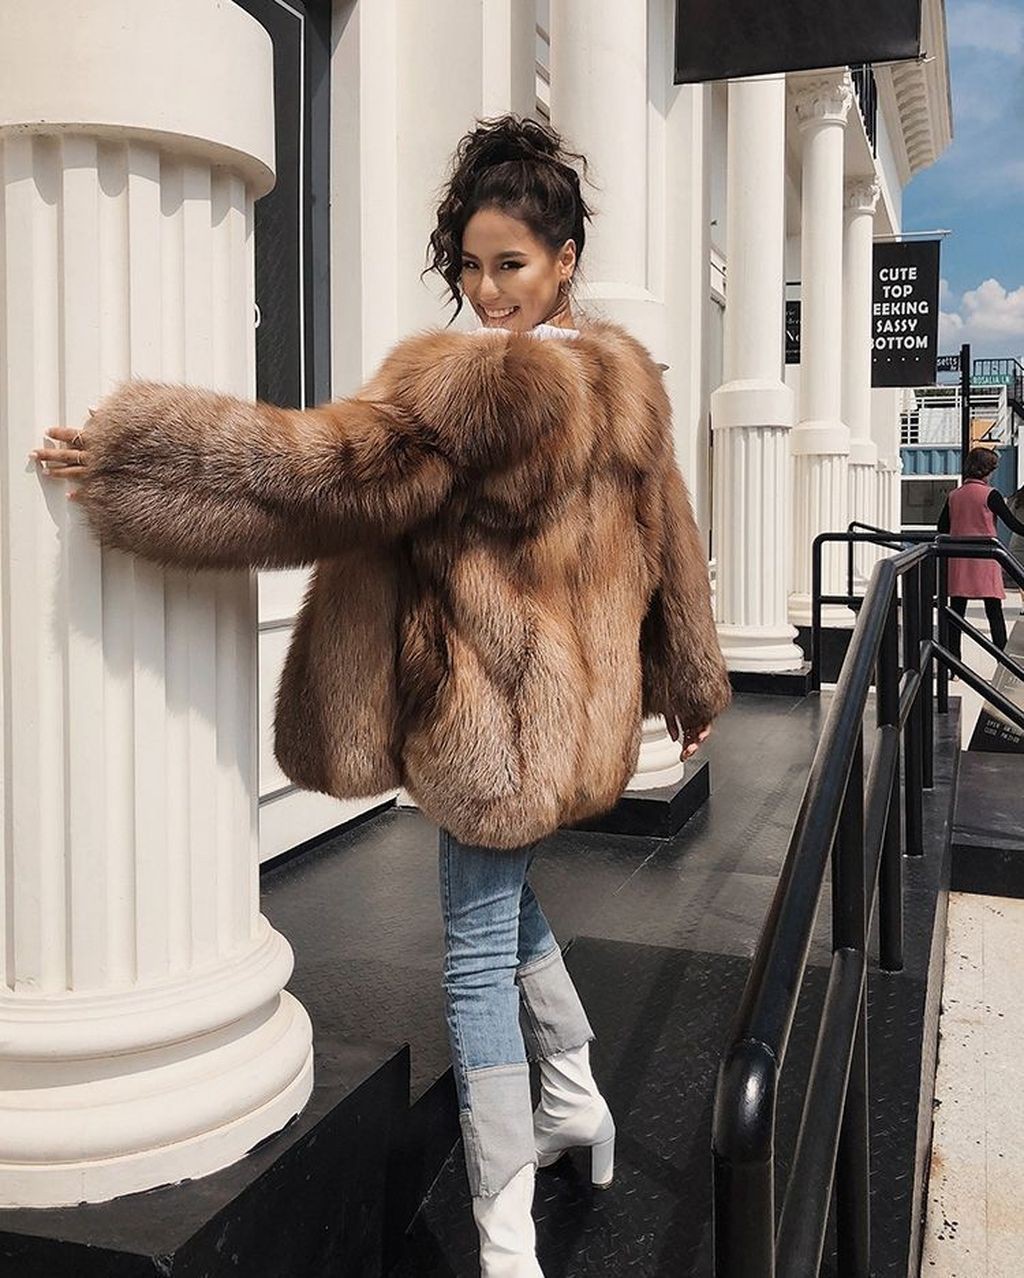 Trendy Faux Fur Coats, Fur clothing, Winter clothing: winter outfits,  Fur clothing,  Fake fur,  Fur Coat Outfit  